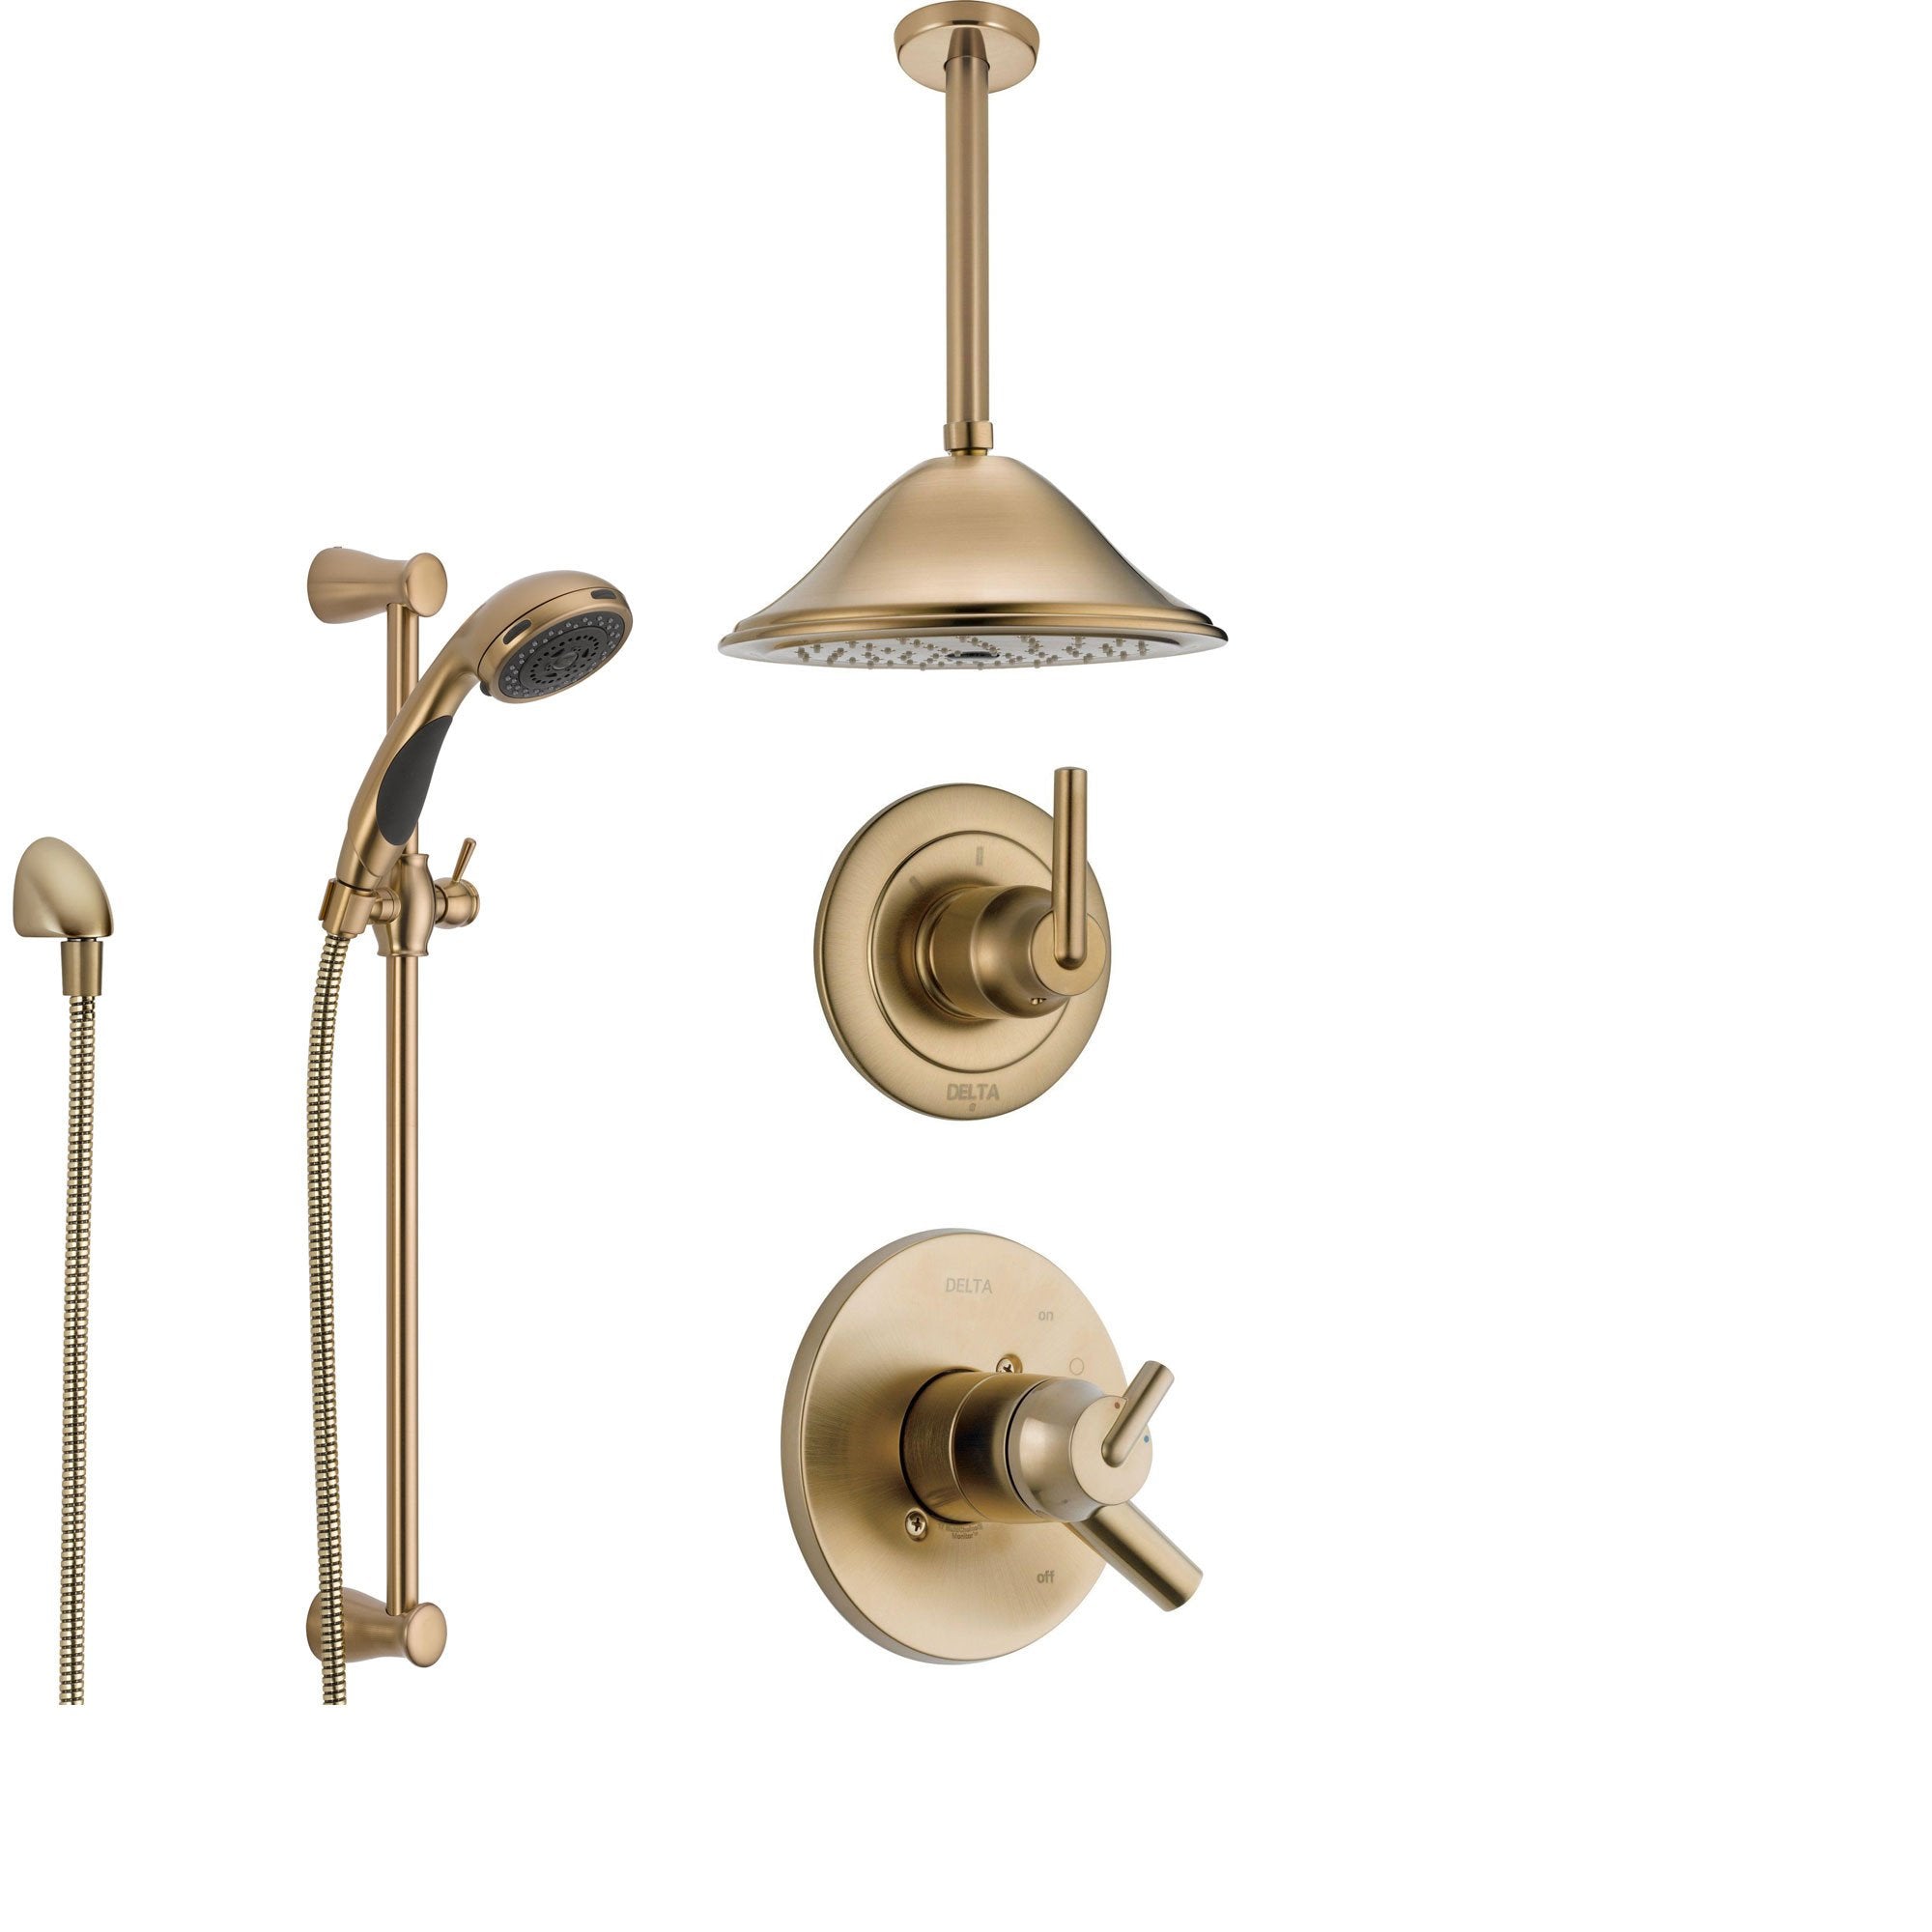 Delta Trinsic Champagne Bronze Shower System with Dual Control Shower Handle, 3-setting Diverter, Large Rain Ceiling Mount Showerhead, and Handheld Spray SS175982CZ